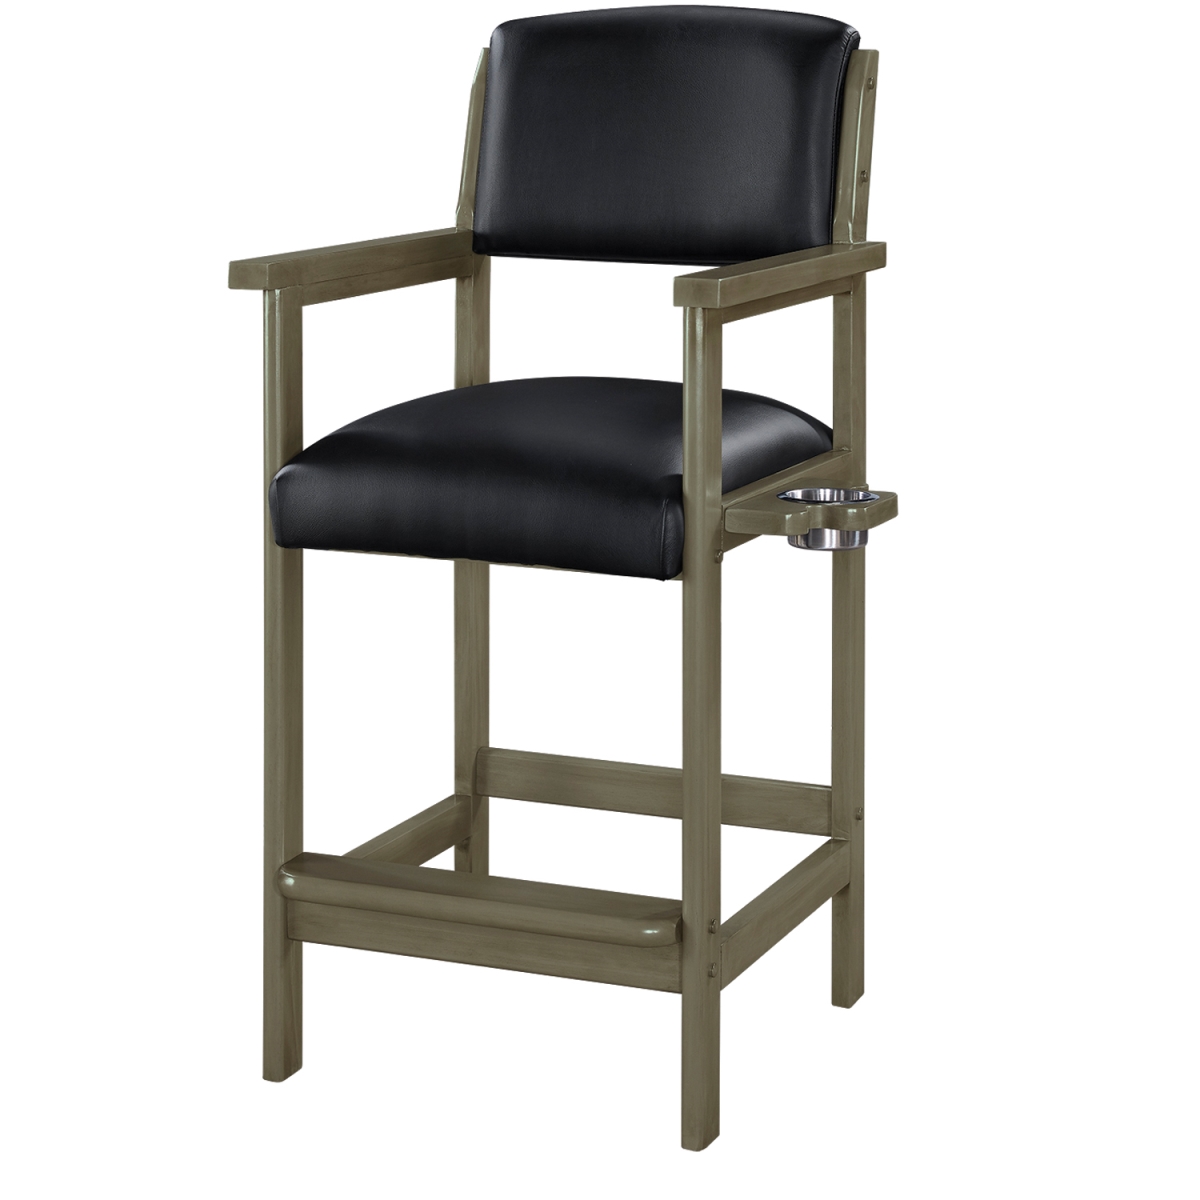 Picture of RAM Game Room SPEC SL 20 x 20 x 45 in. Spectator Chair with Drink Holder, Slate